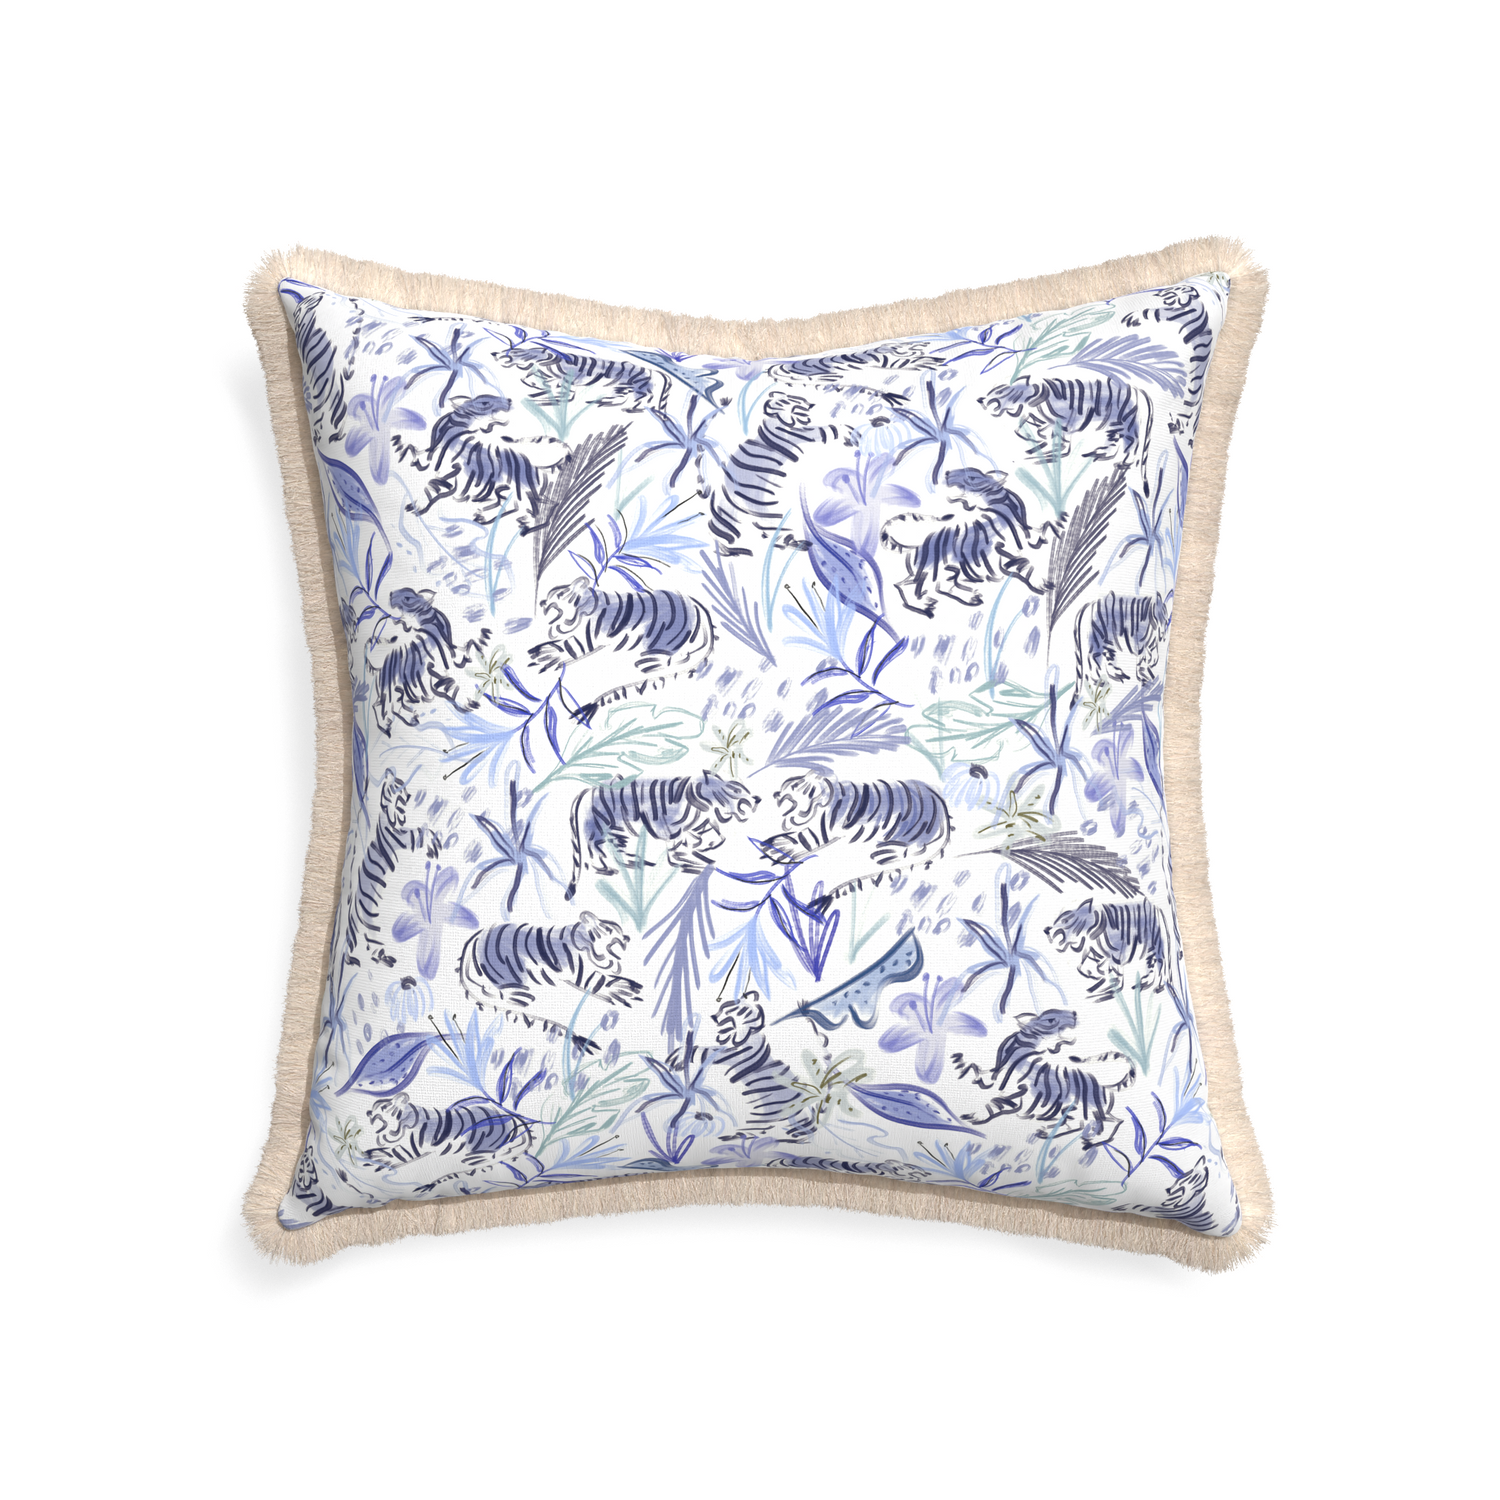 22-square frida blue custom blue with intricate tiger designpillow with cream fringe on white background